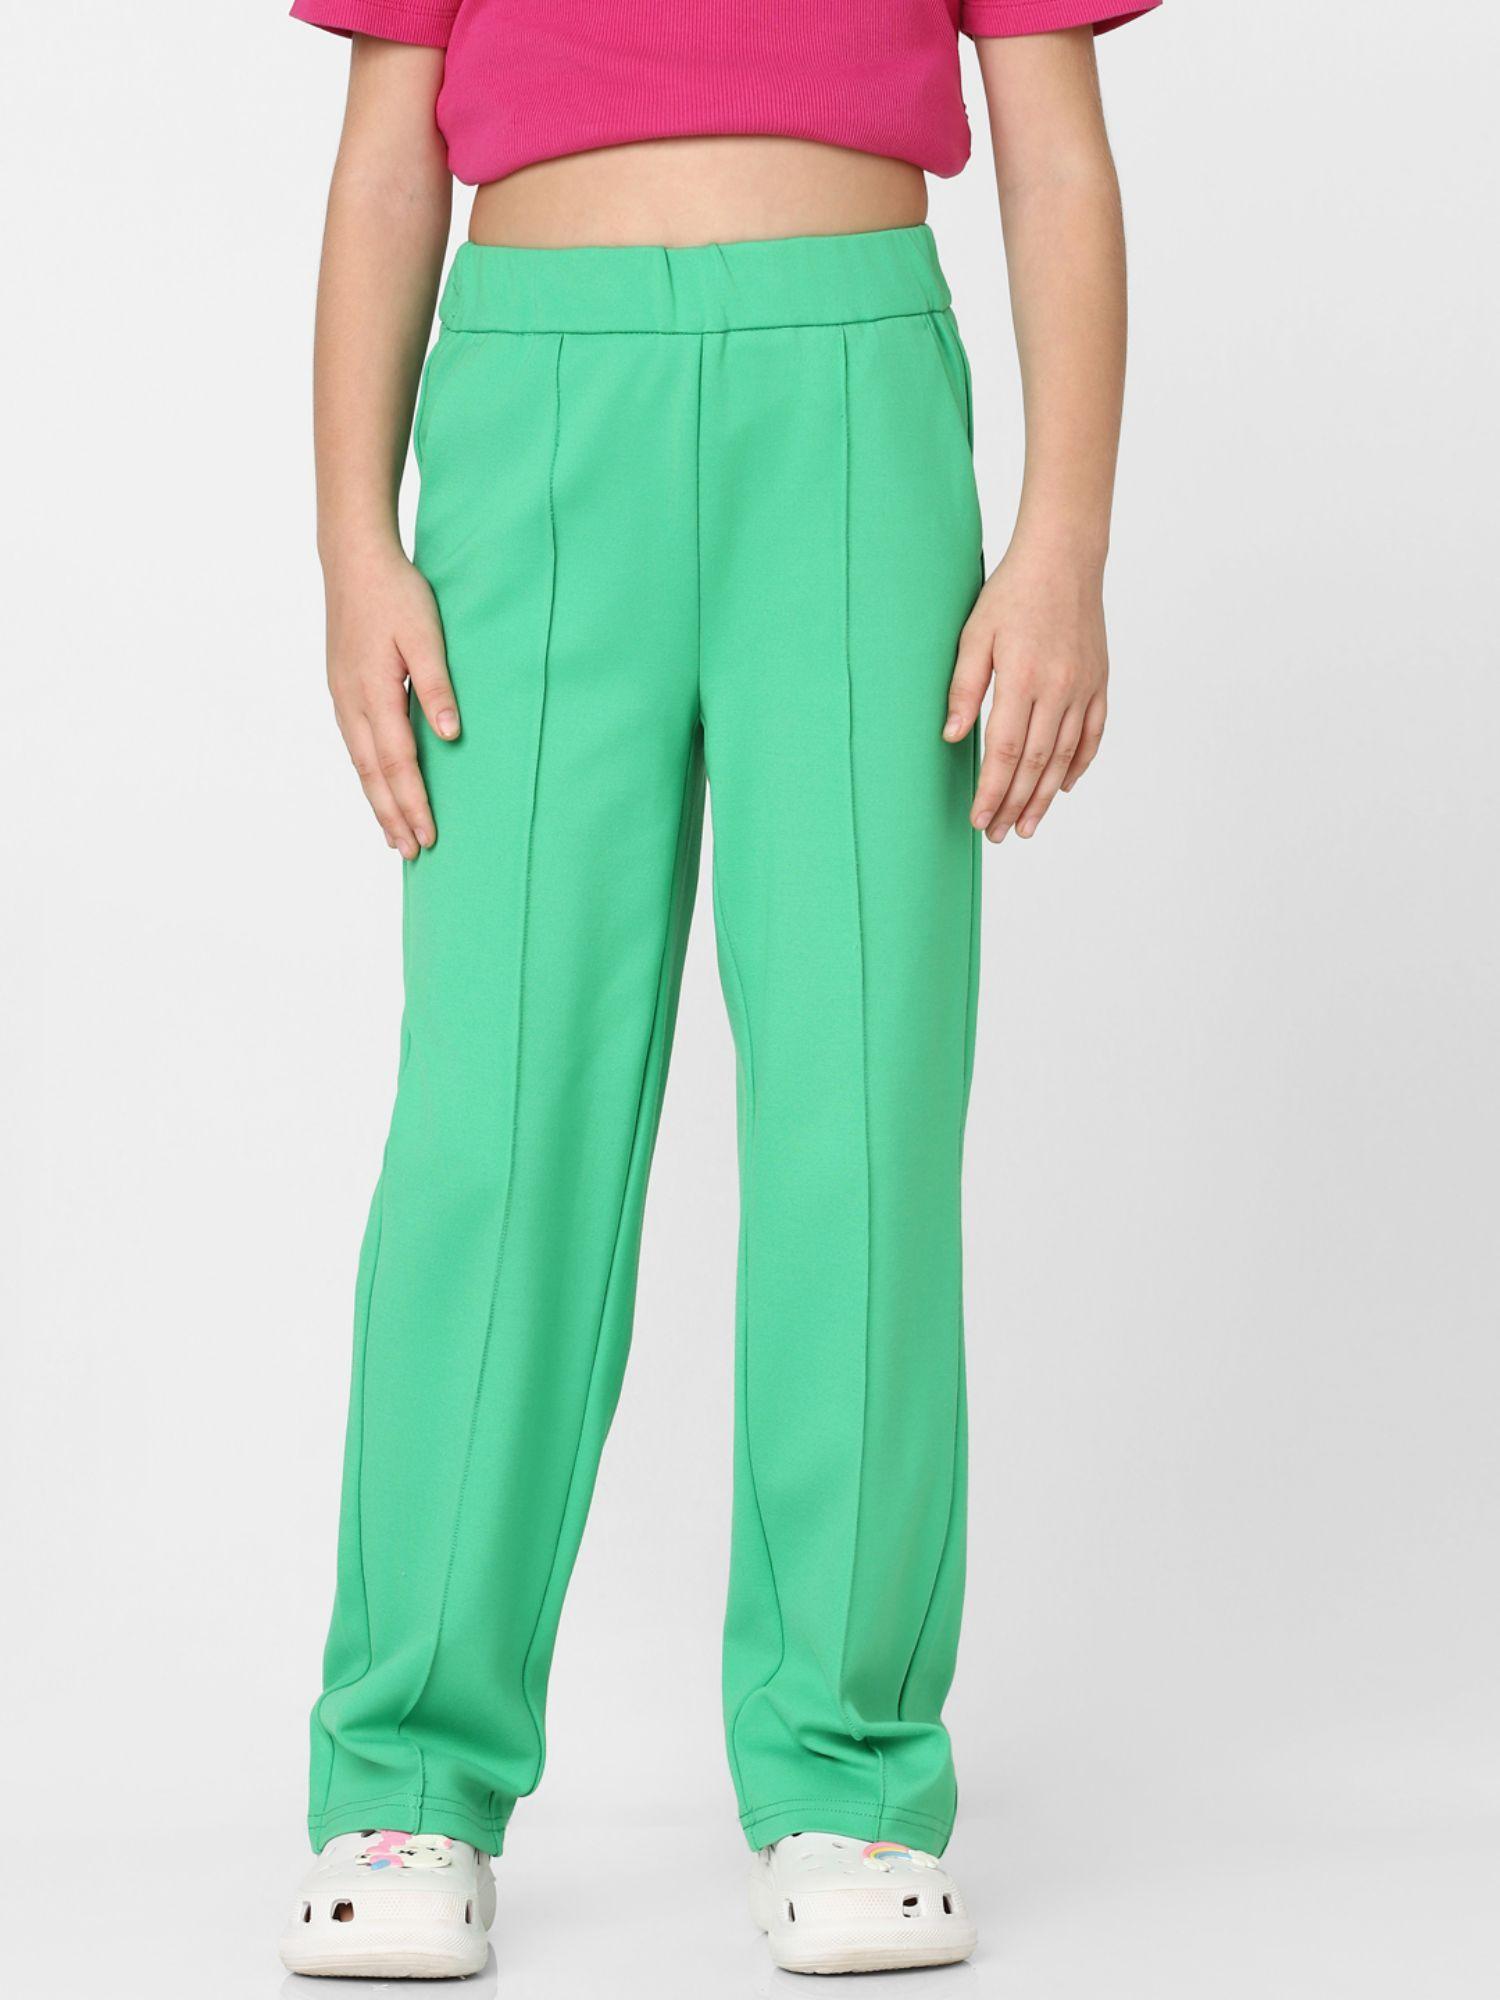 girls solid green trousers